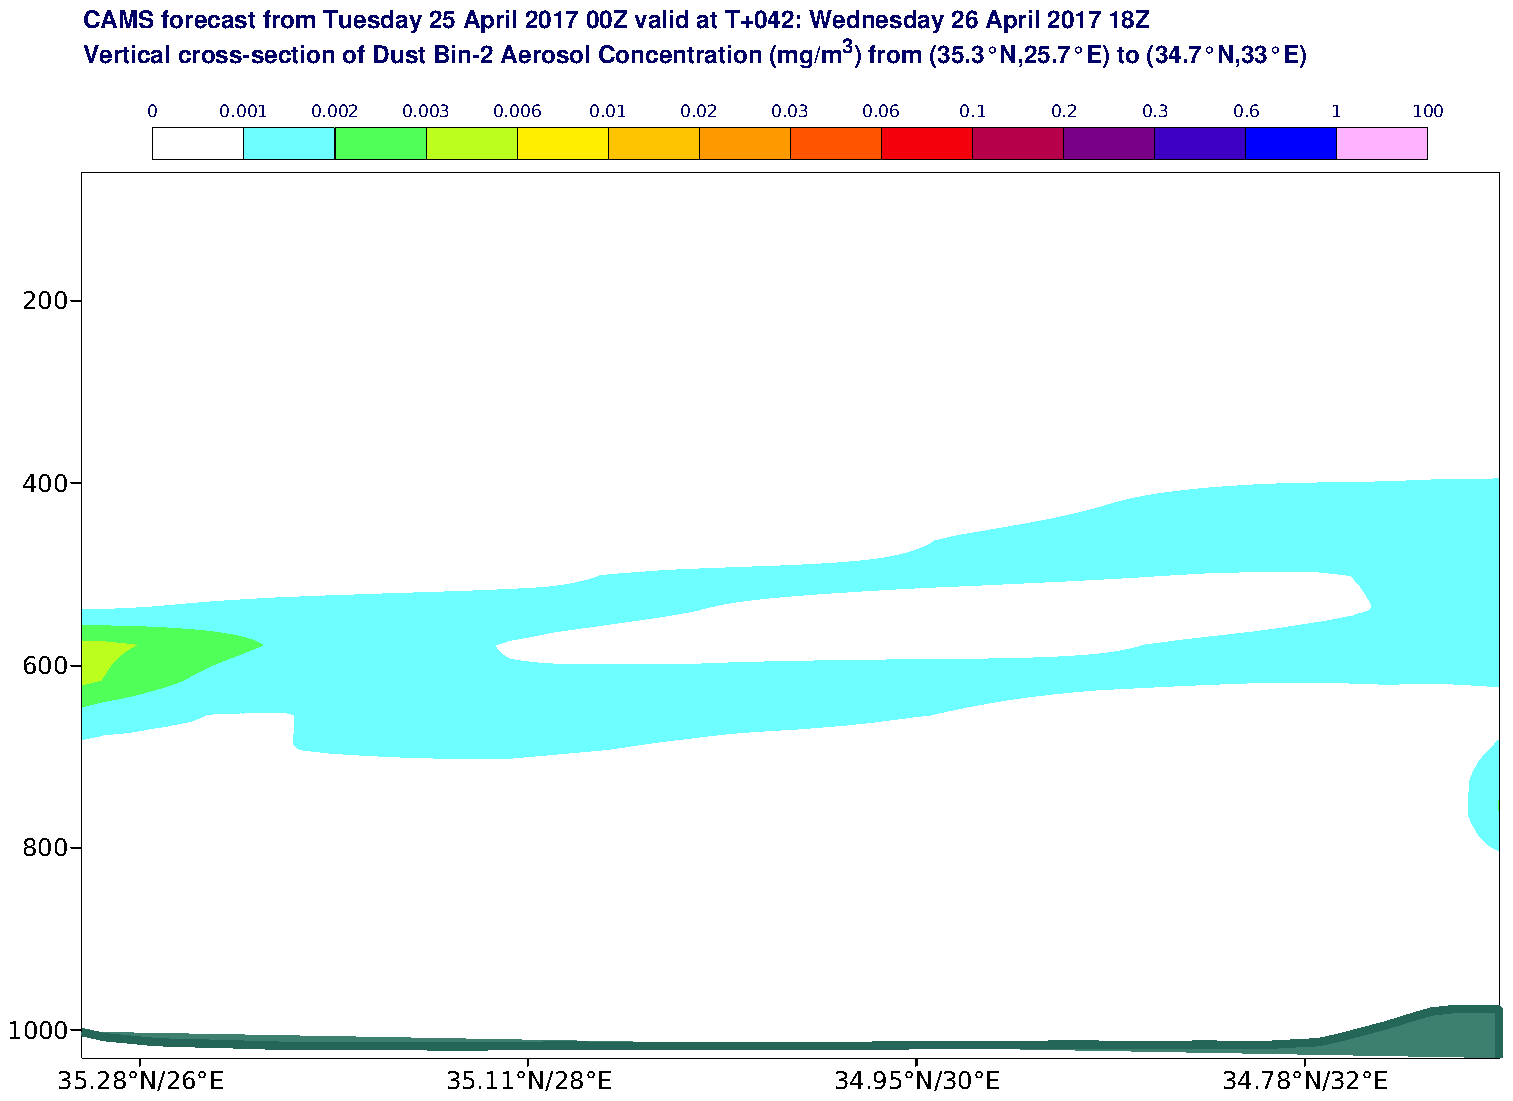 Vertical cross-section of Dust Bin-2 Aerosol Concentration (mg/m3) valid at T42 - 2017-04-26 18:00